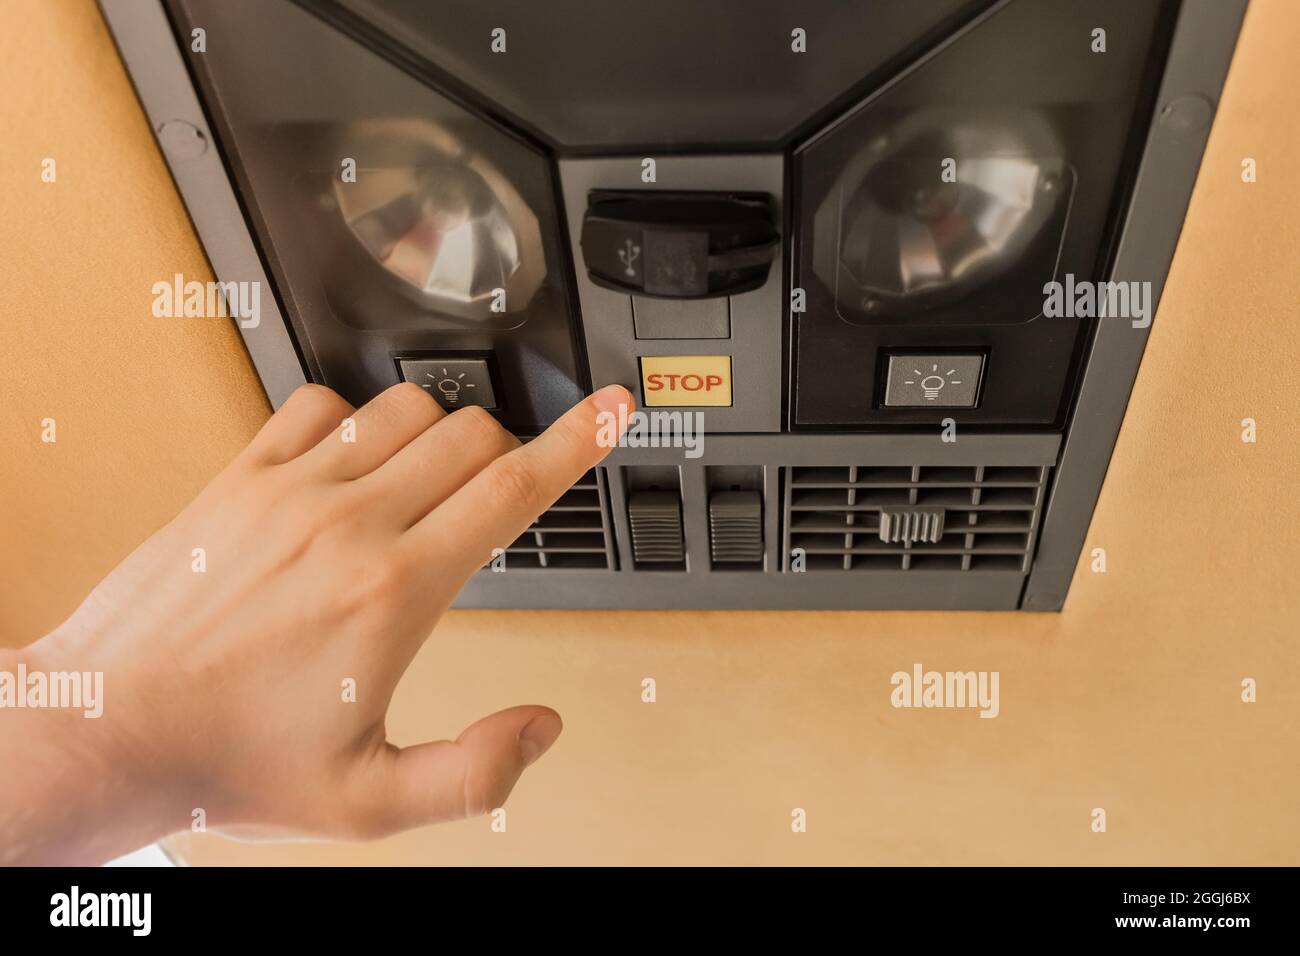 The guy's hand points his finger at the stop button of the air conditioning system in the ceiling of the tourist bus. Stock Photo